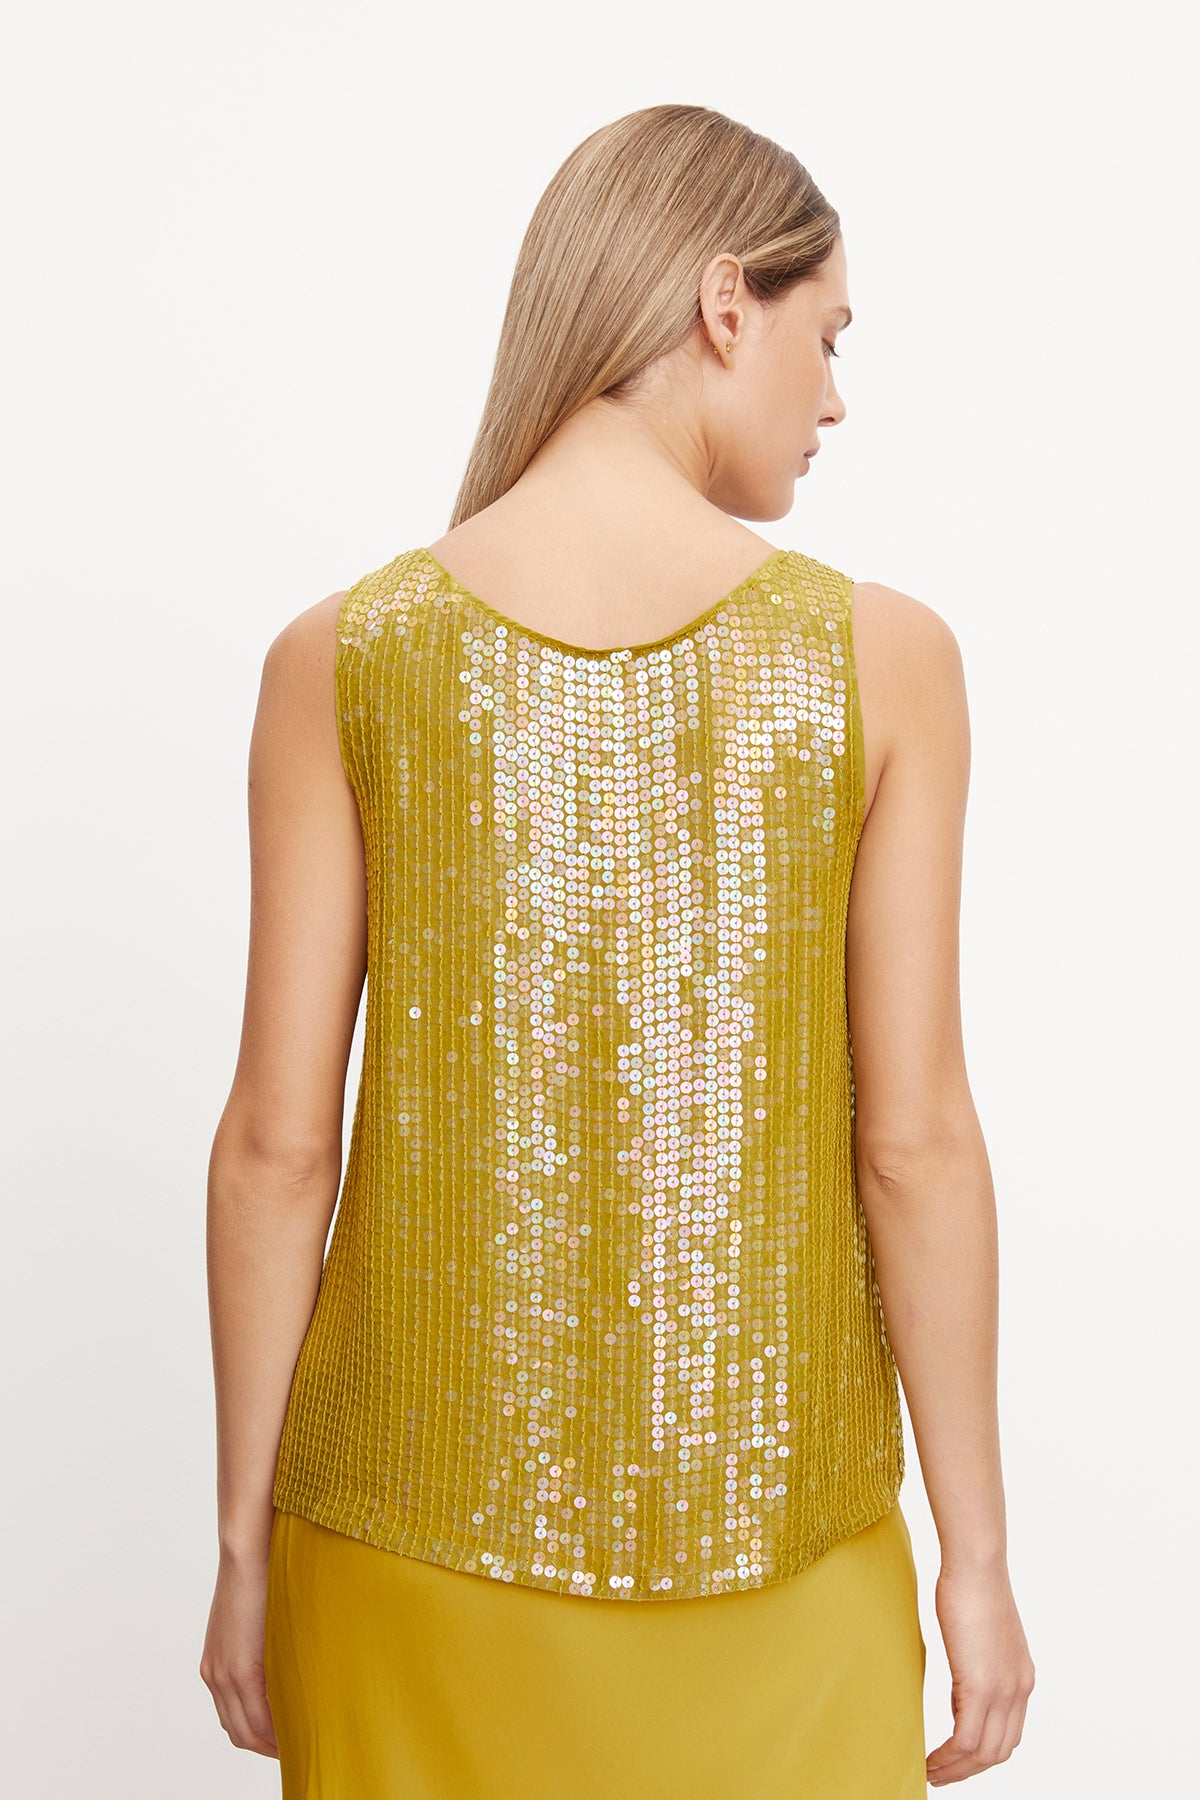 The woman is wearing a BEHATI SEQUIN TANK TOP by Velvet by Graham & Spencer, a yellow sequin top with chic scoop neckline and sequin detailing, showcasing an a-line silhouette from the back view.-35577744031937